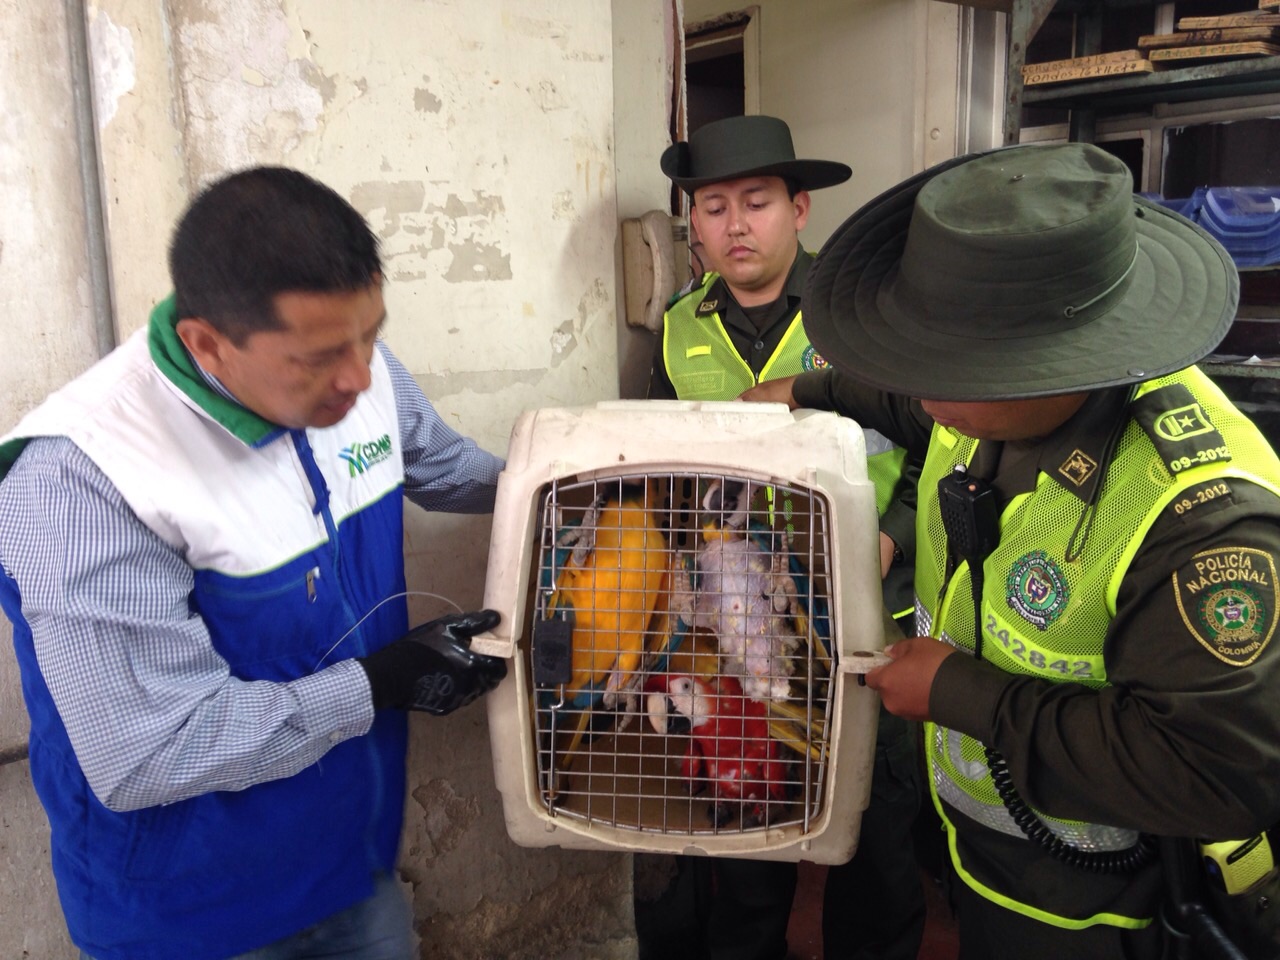 Colombian National Army and Police Combat Illegal Wildlife Trafficking